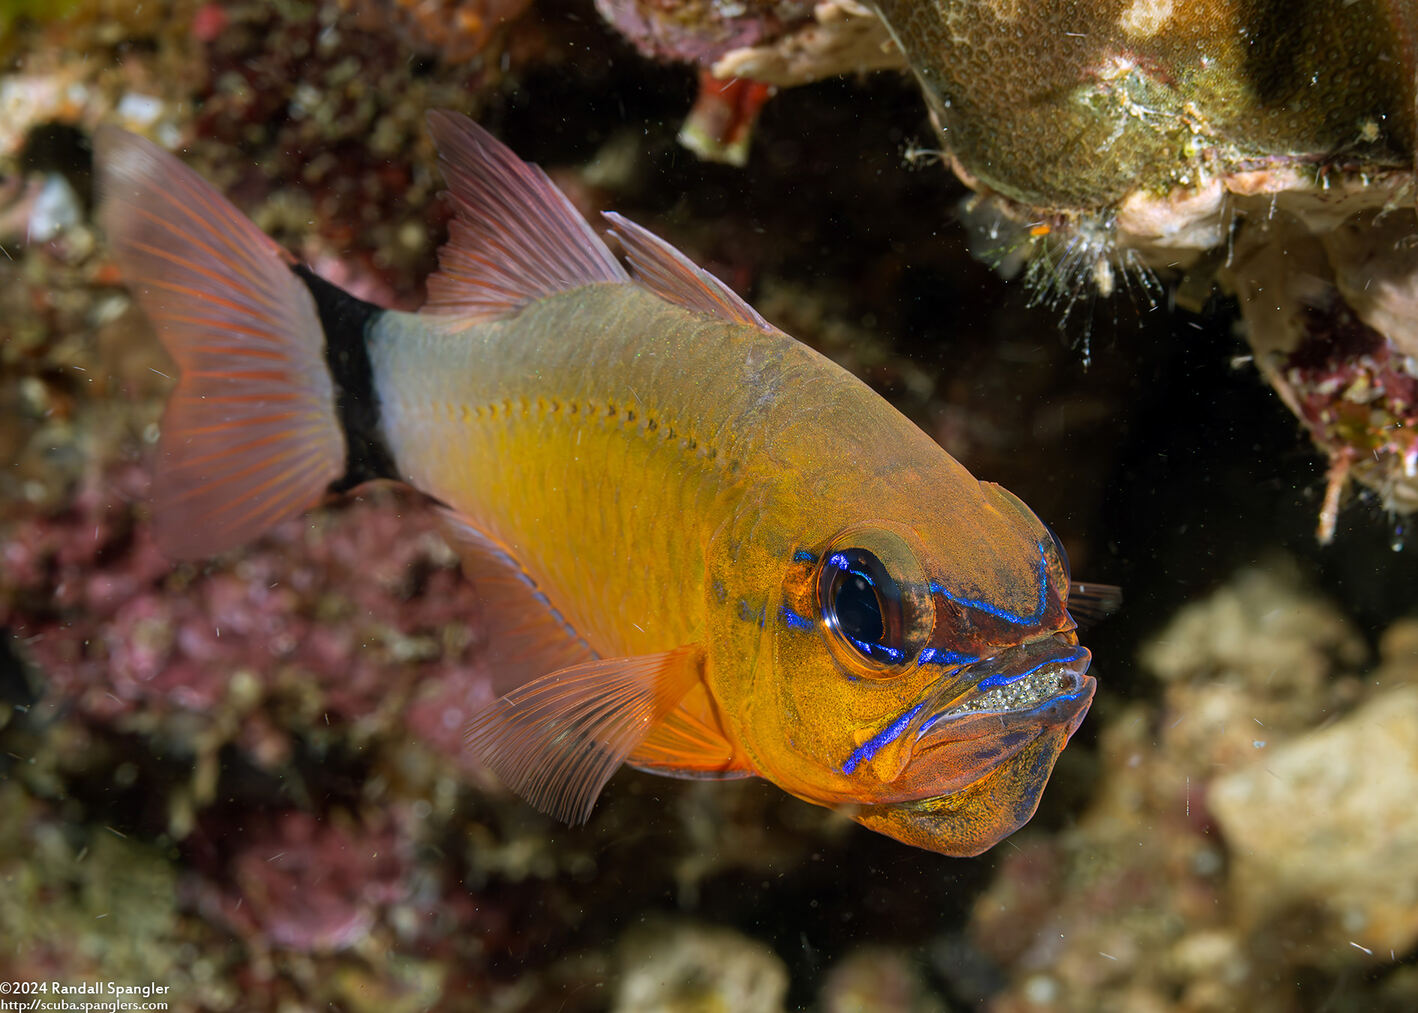 Ostorhinchus aureus (Ringtailed Cardinalfish); With eggs in its mouth